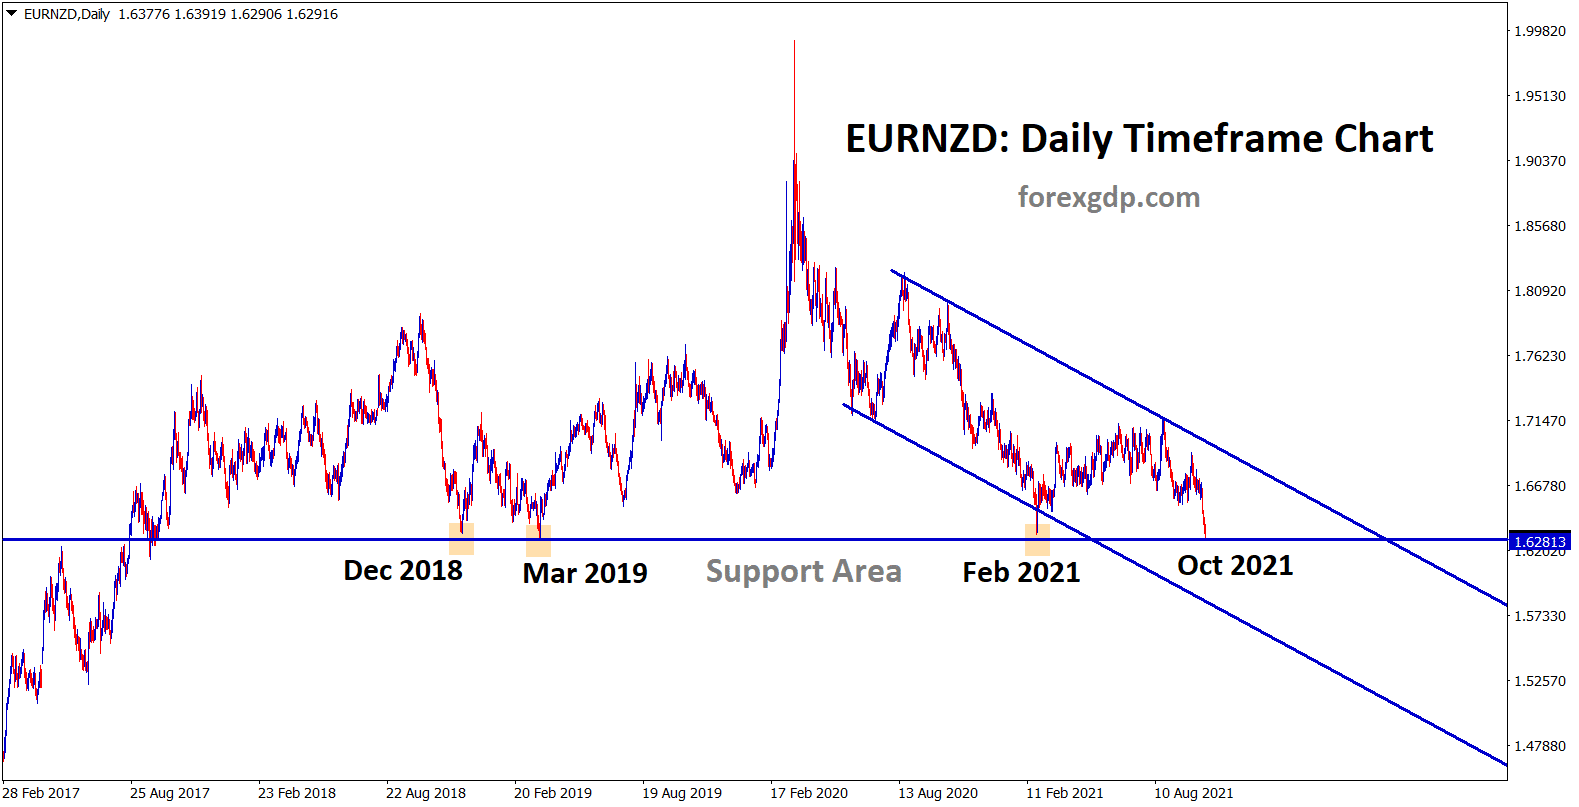 EURNZD is standing exactly at the Multi year support area in the daily timeframe chart